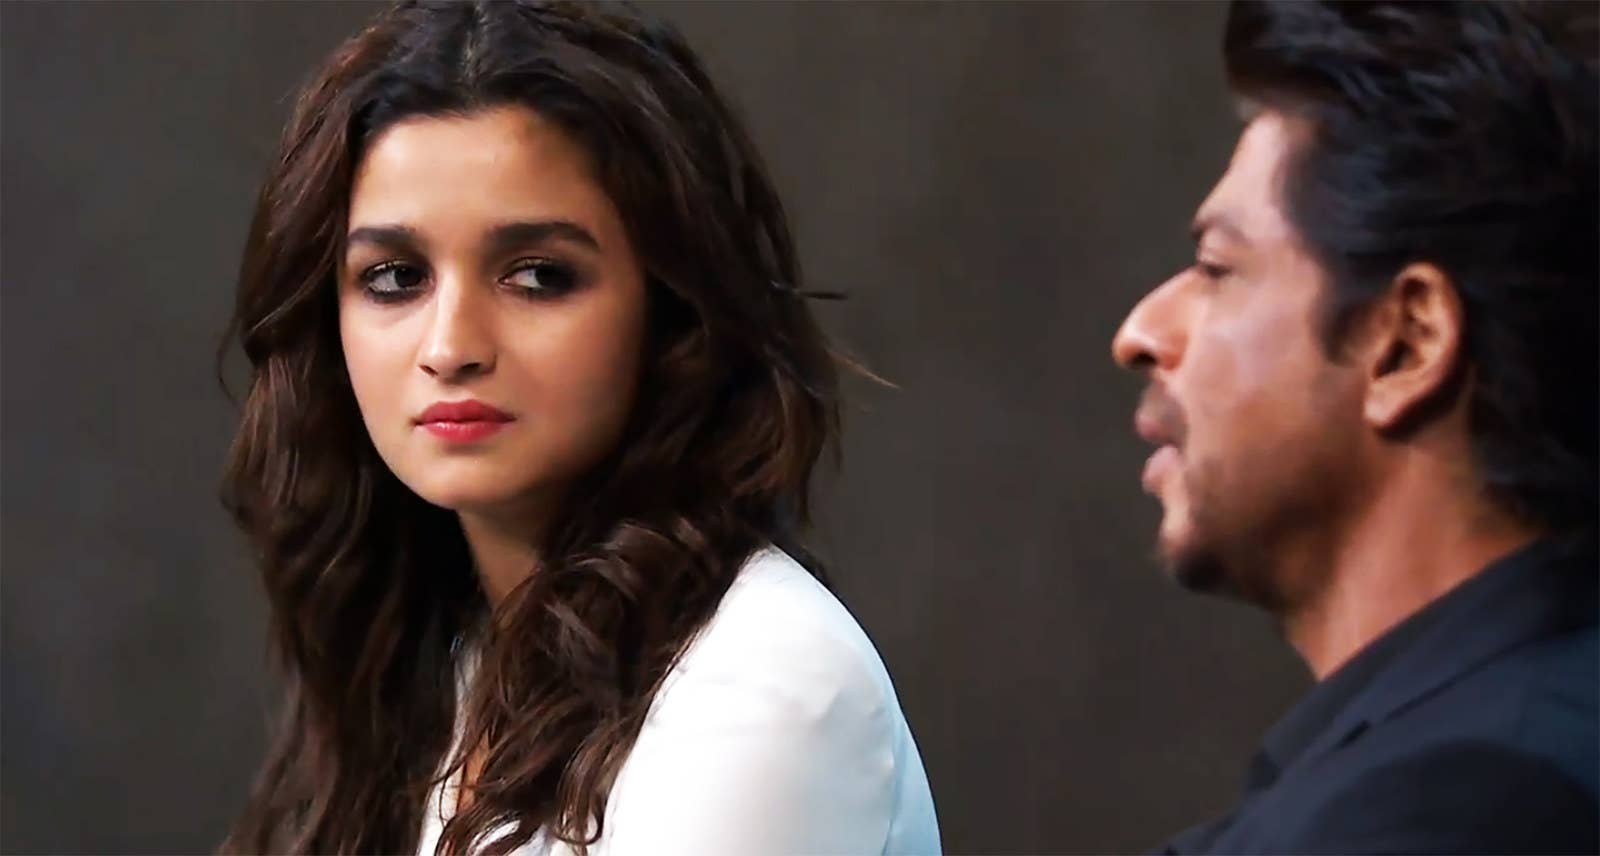 Sexy Video Alia Ki Sexy Full Hd - Alia Bhatt Is An Incredible Actor, But Her Real Skill Is Decision-Making